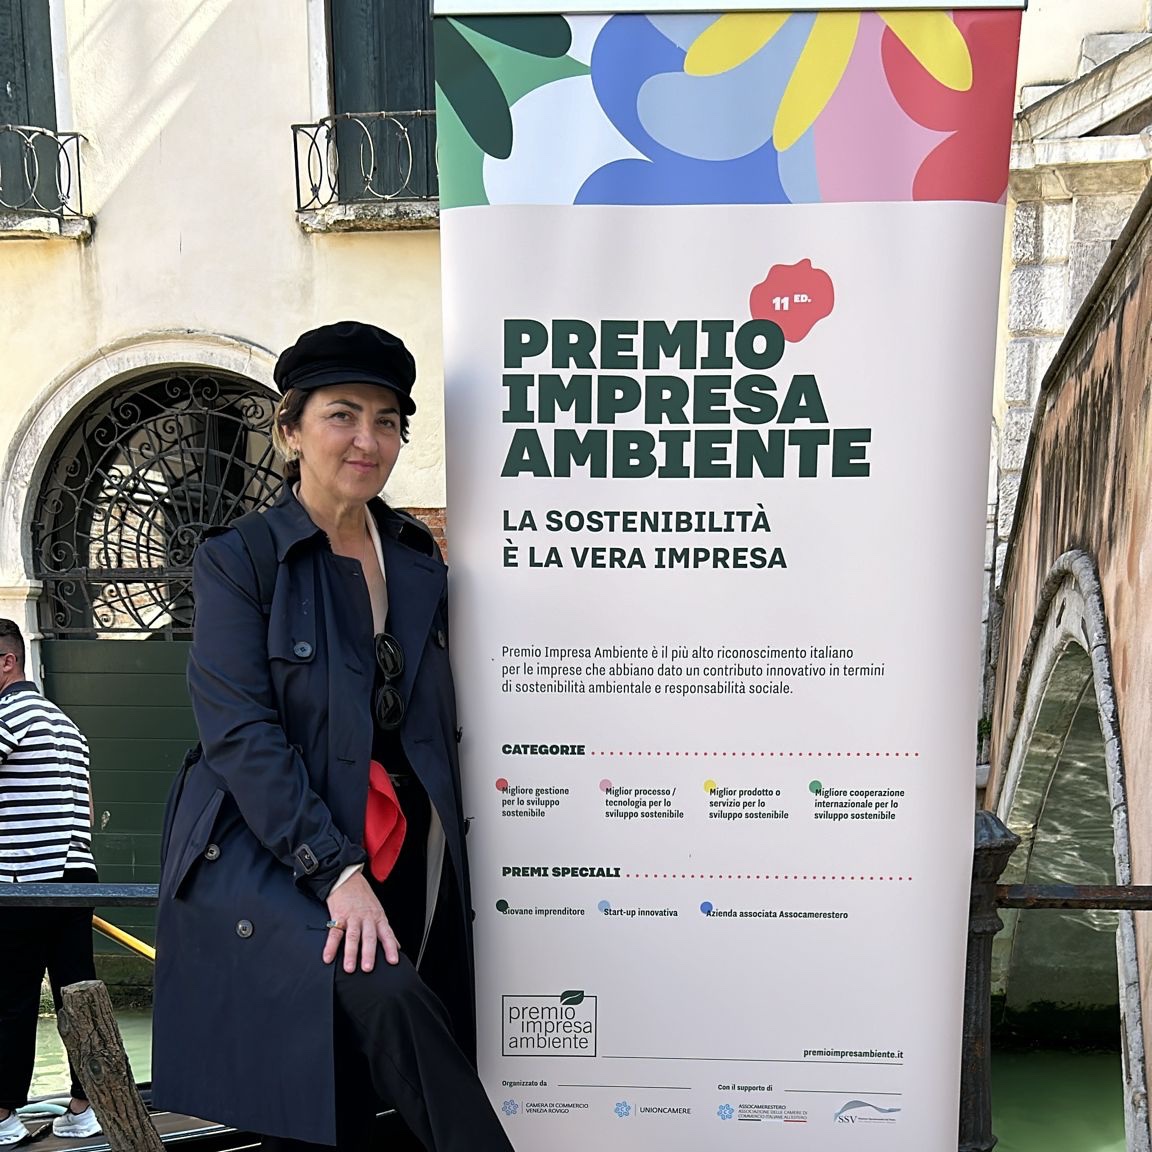 Today we're in #Venice for the award ceremony of the 11th edition of Premio Impresa Ambiente 🍃 @PIA_XIedizione Promoted by @unioncamere and @camcomVeRo, this award is the 🇮🇹 highest recognition for companies driving #sustainability and social responsibility toward the #SDGs.